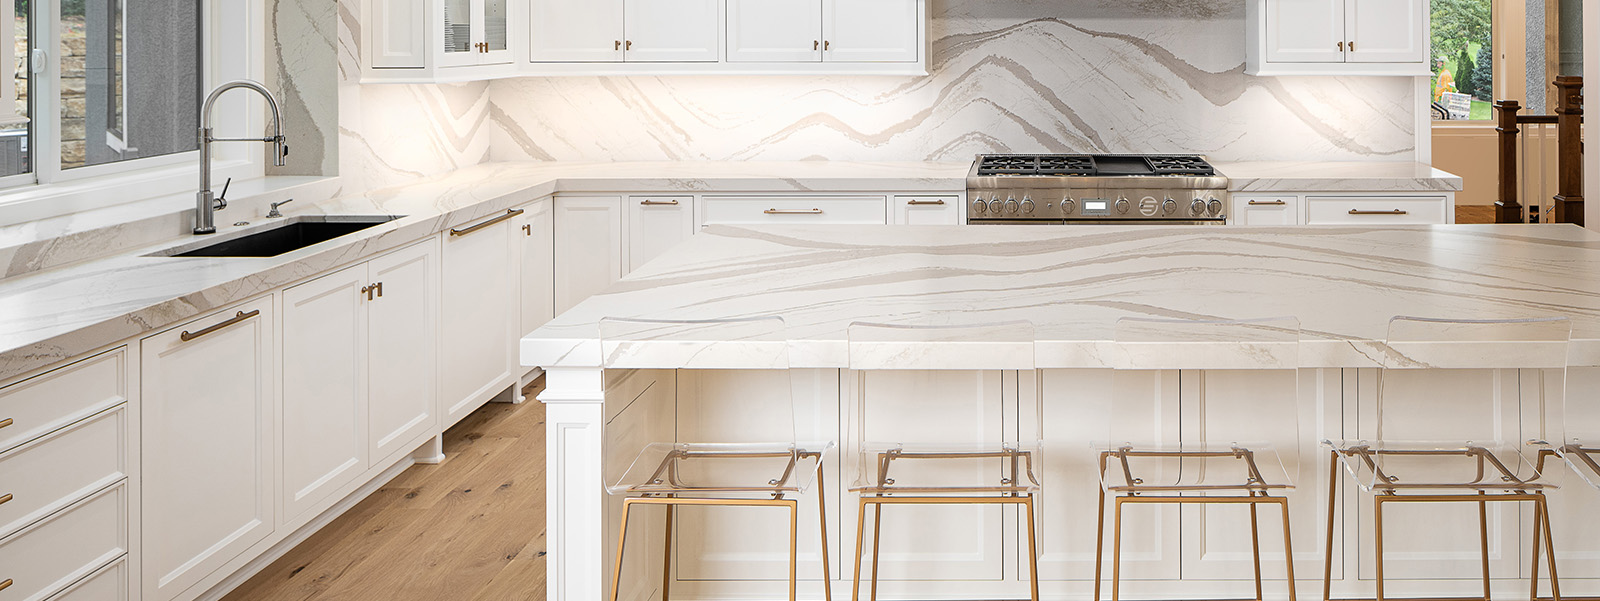 Granite vs. Quartz Countertops: What's the Right Top for Your Home? -  Creative Contracting